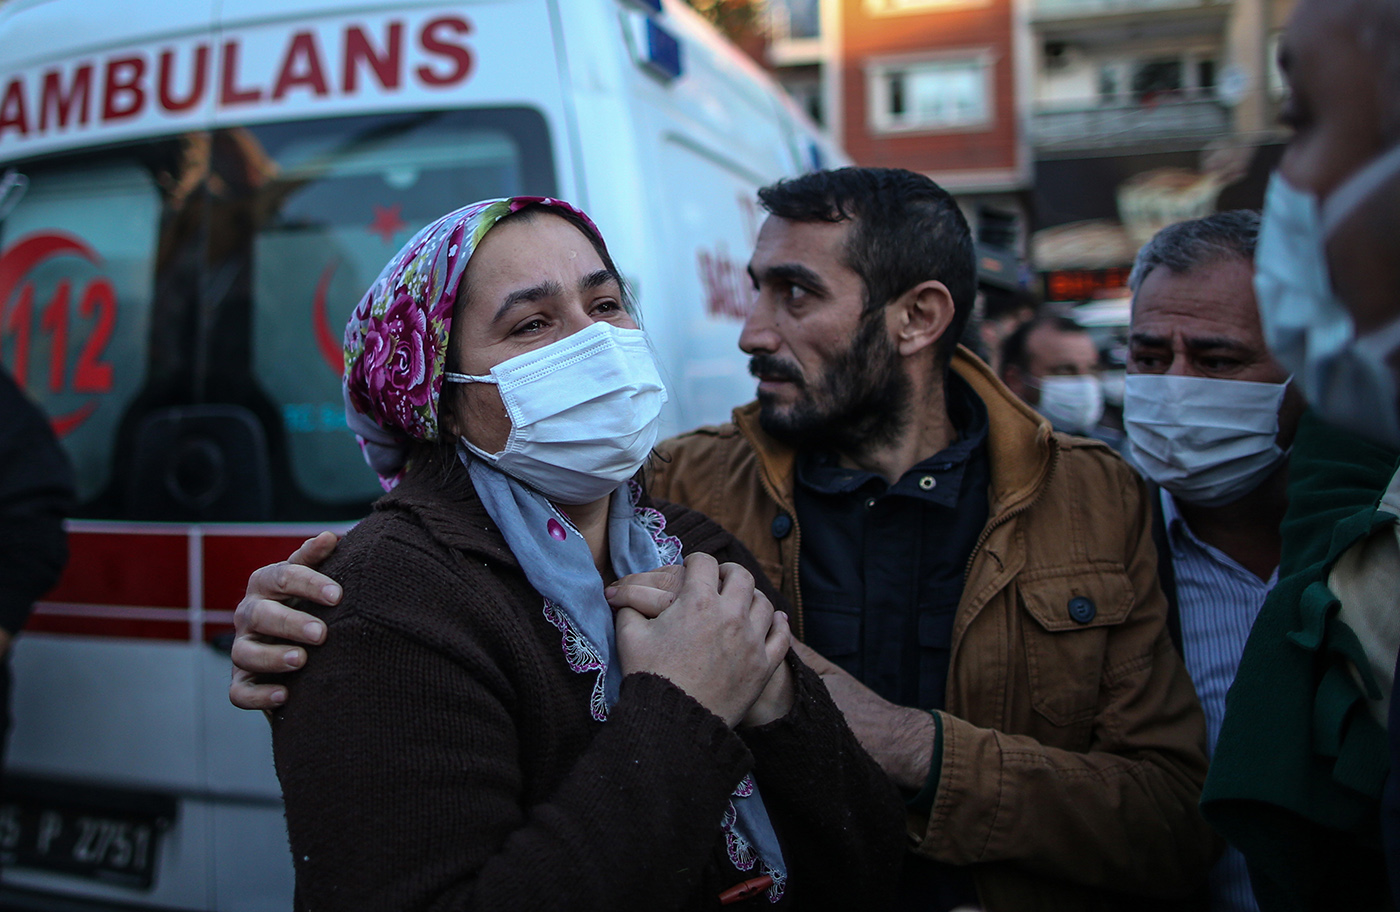 A woman waits for a news from their relatives believed to be trapped under collapsed buildings  after a 7.0 magnitude earthquake in the Aegean Sea, at Bayrakli district in Izmir, Turkey, 31 October 2020. According to Turkish media reports, at least twenty four people died while more than eight  hundreds were injured and dozens of buildings were destroyed in the earthquake.